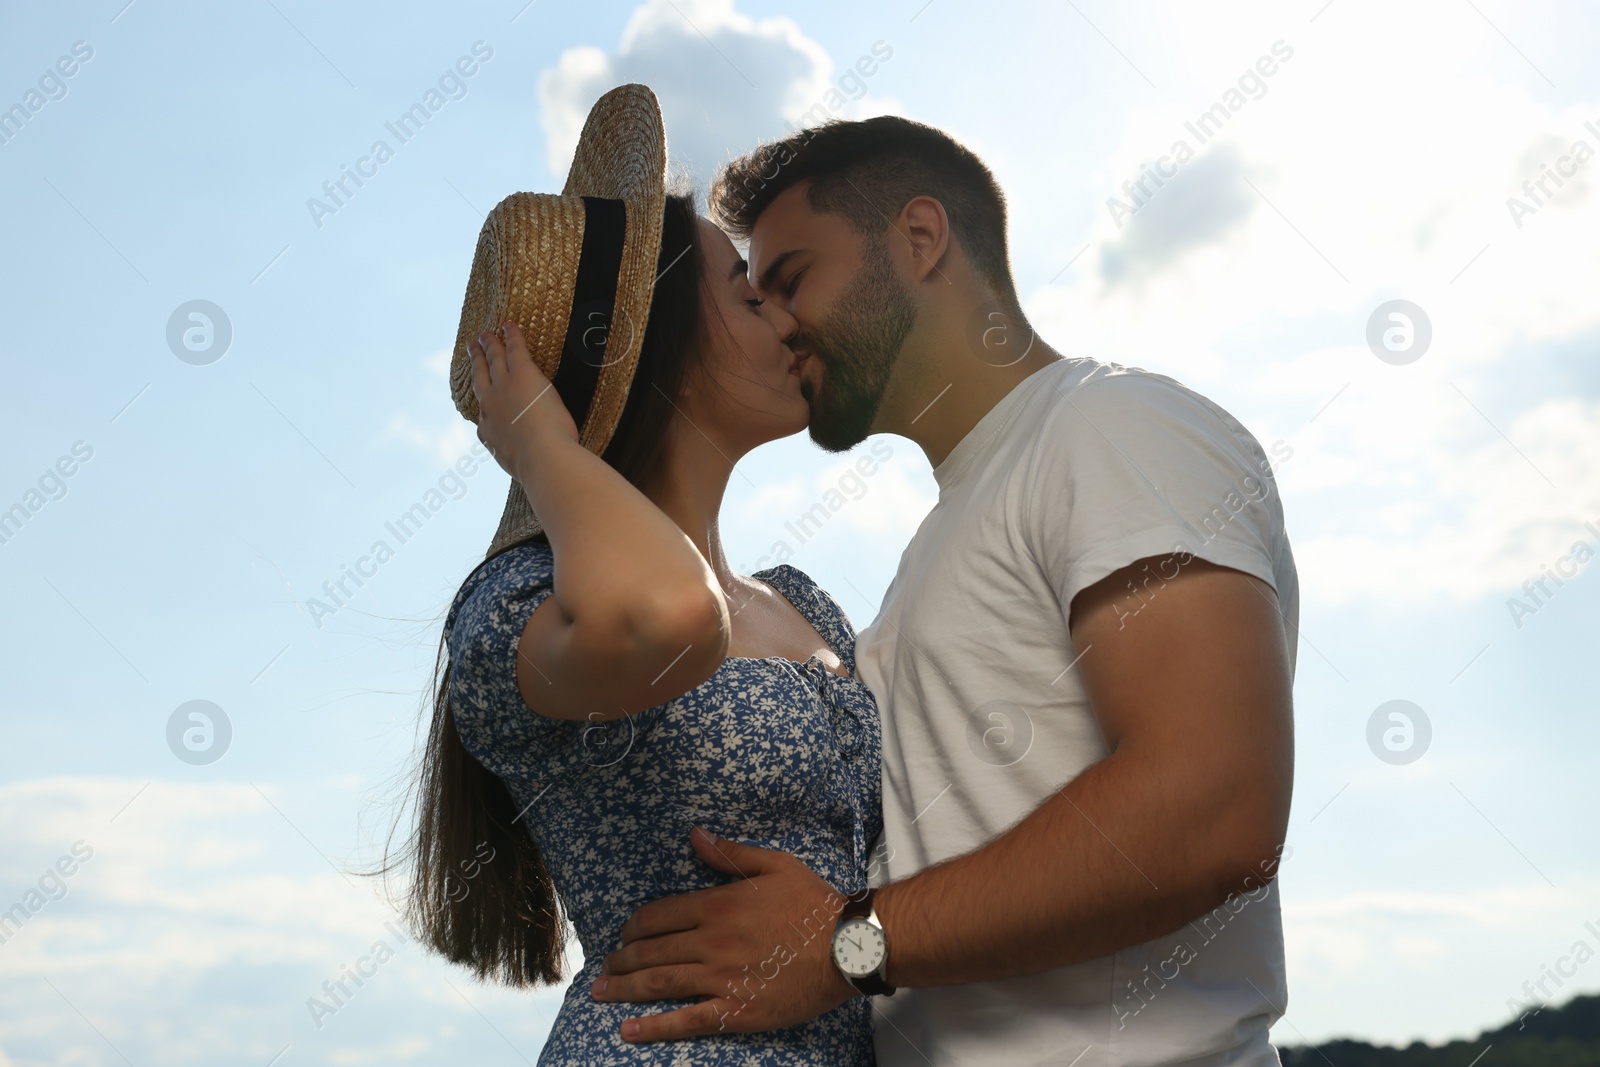 Photo of Romantic date. Beautiful couple kissing against blue sky